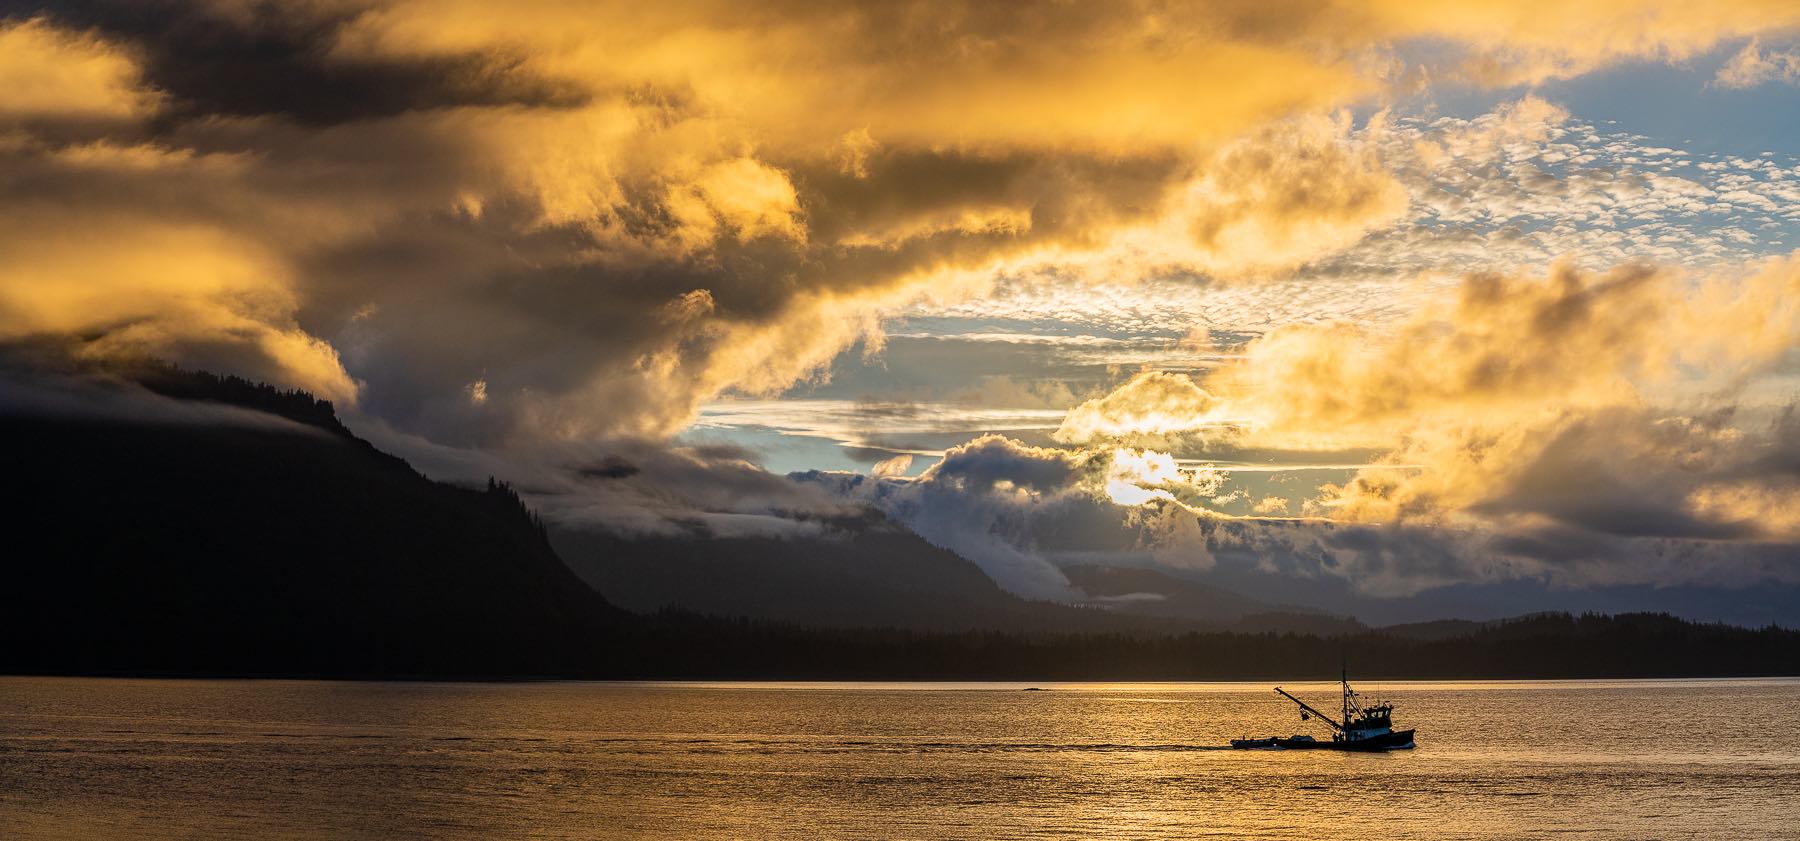 Panorama of a boat on the water with mountains and a golden sunset in the background